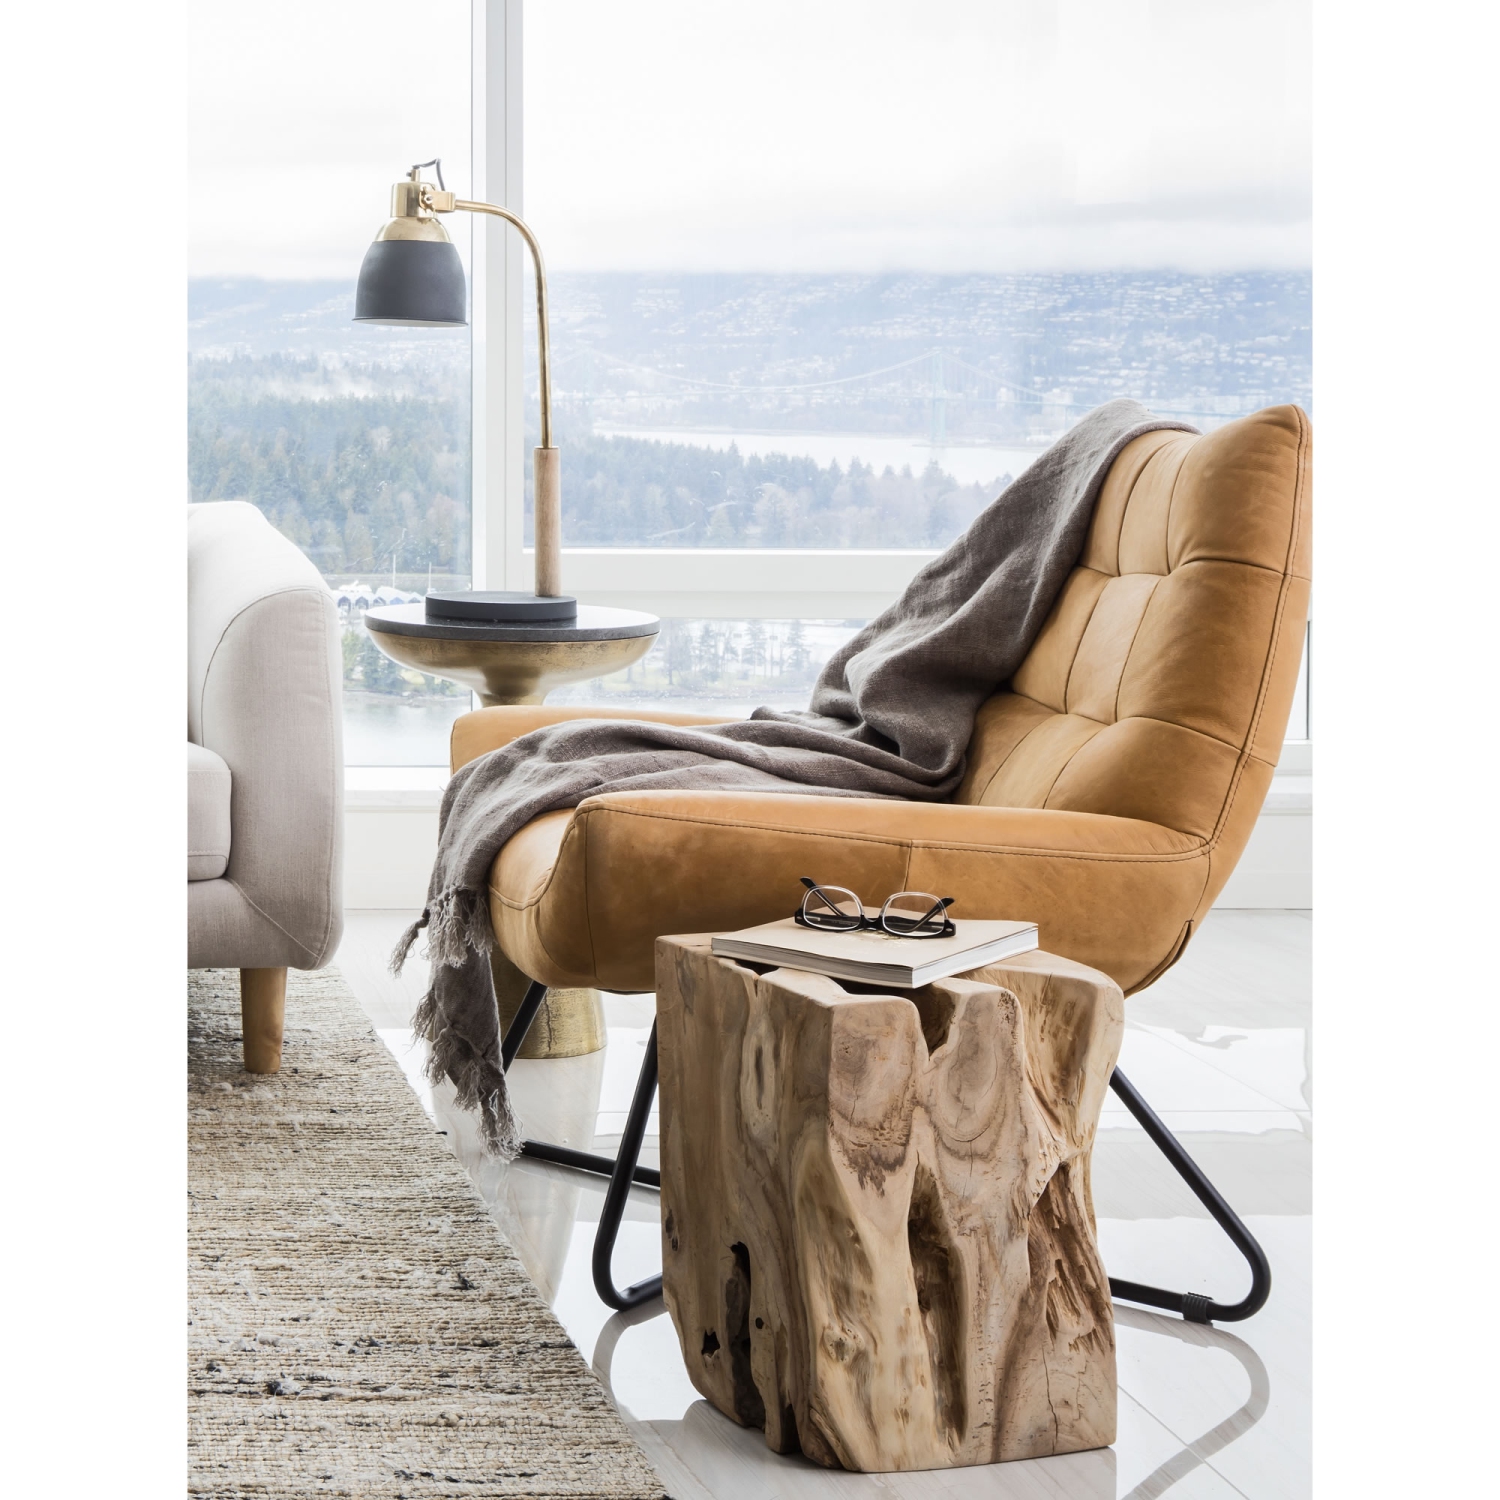 Cognac Leather Accent Chair : Comfortable, stylish accent seating that